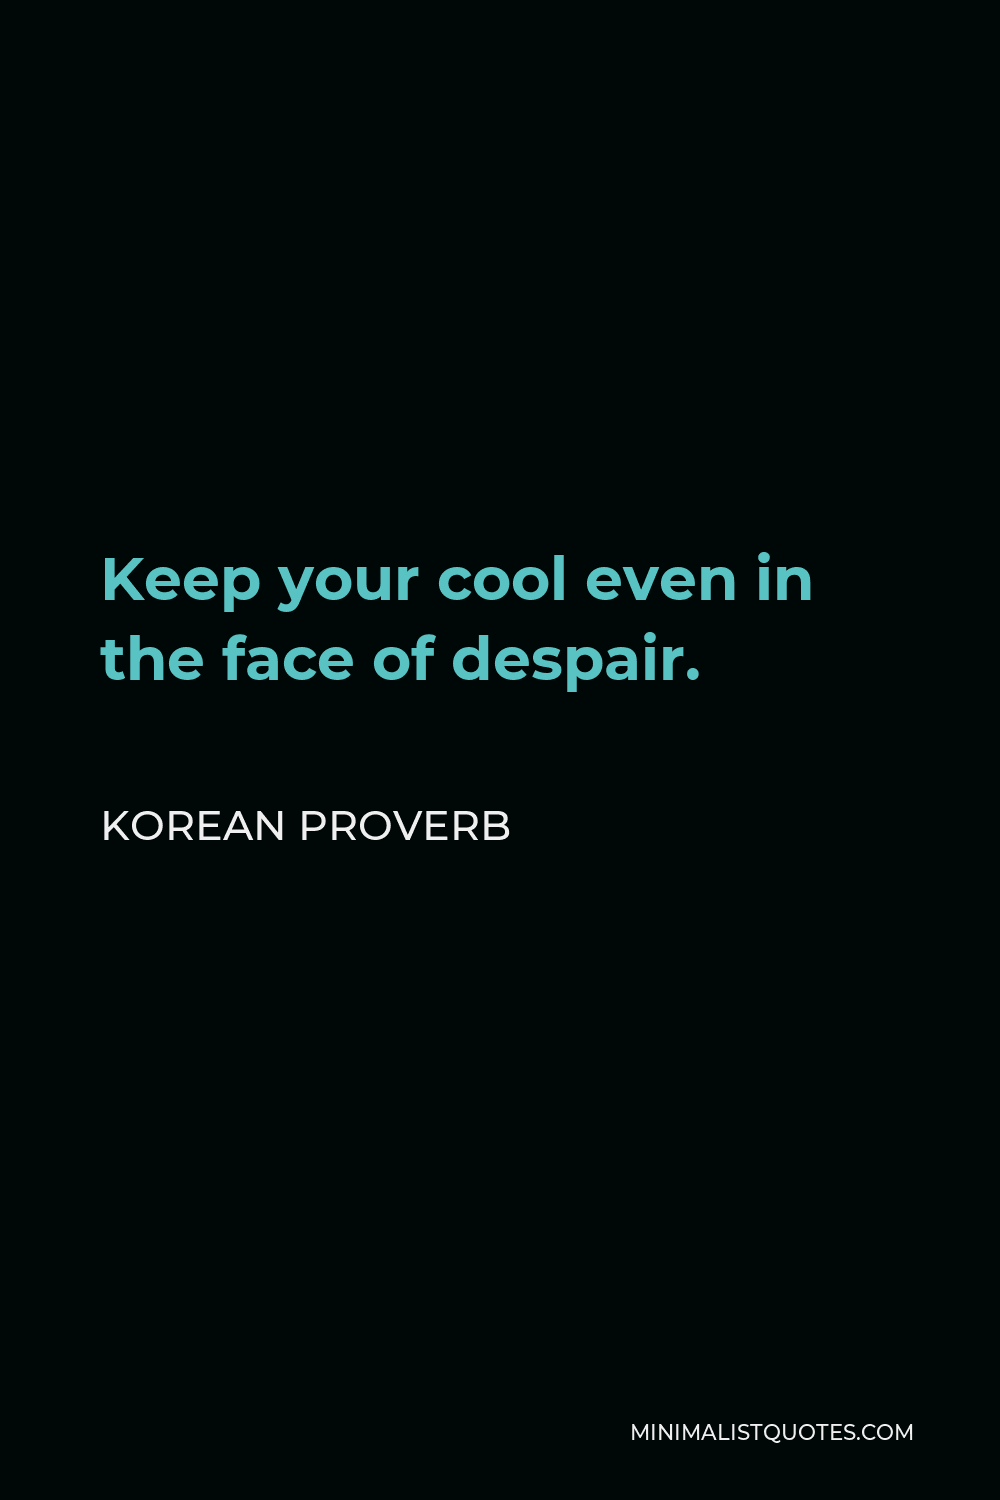 Korean Proverb Quote - Keep your cool even in the face of despair.